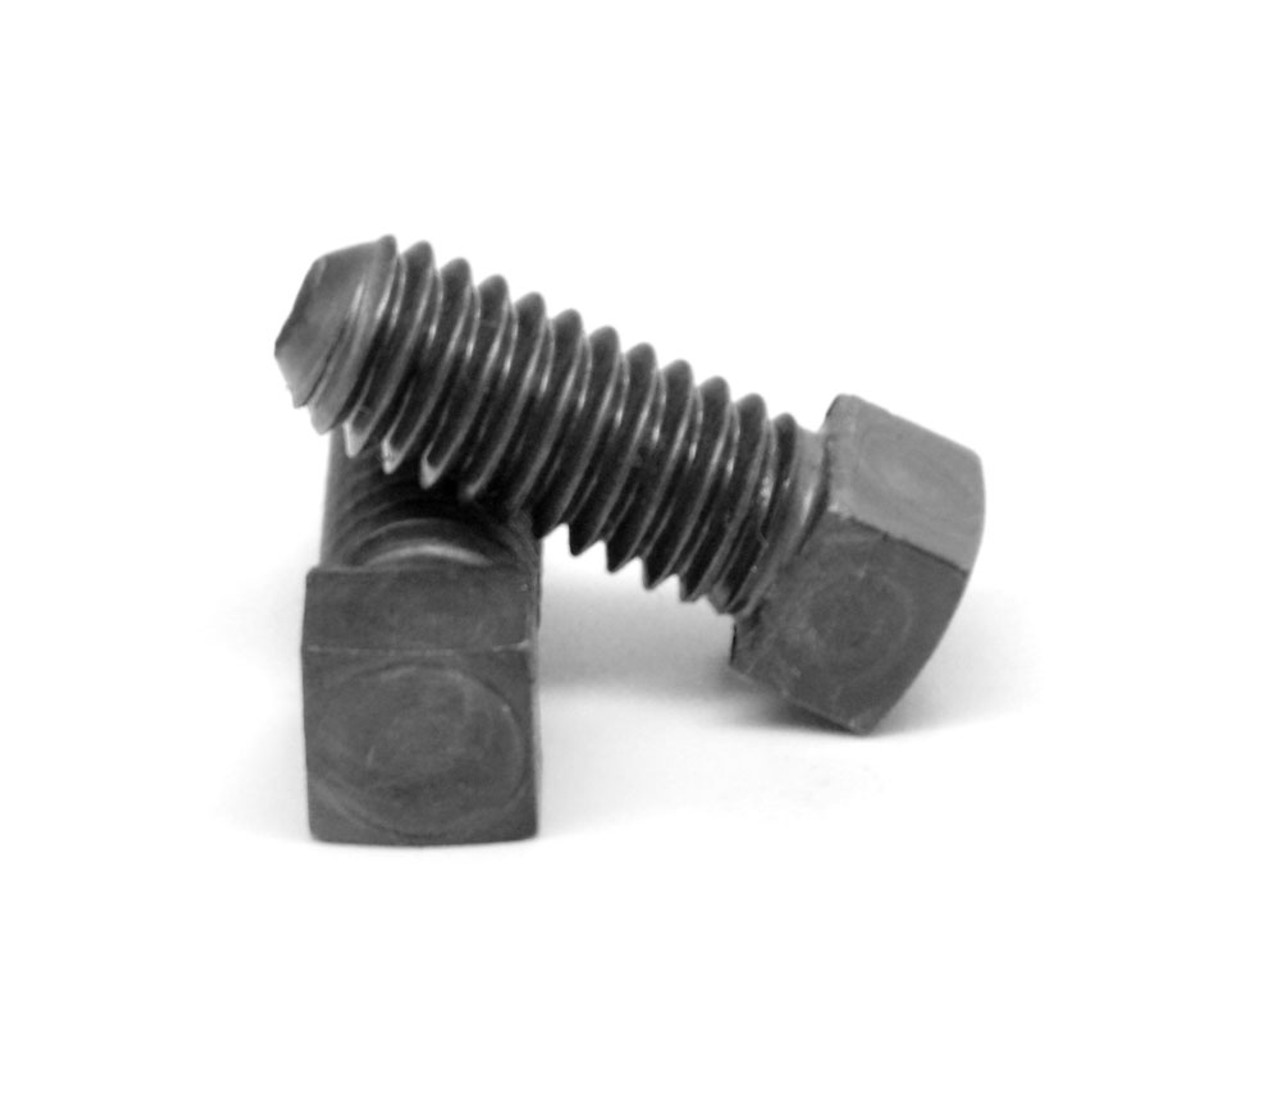 5/16"-18 x 5/8" (FT) Coarse Thread Square Head Set Screw Oval Point Low Carbon Steel Case Hardened Plain Finish